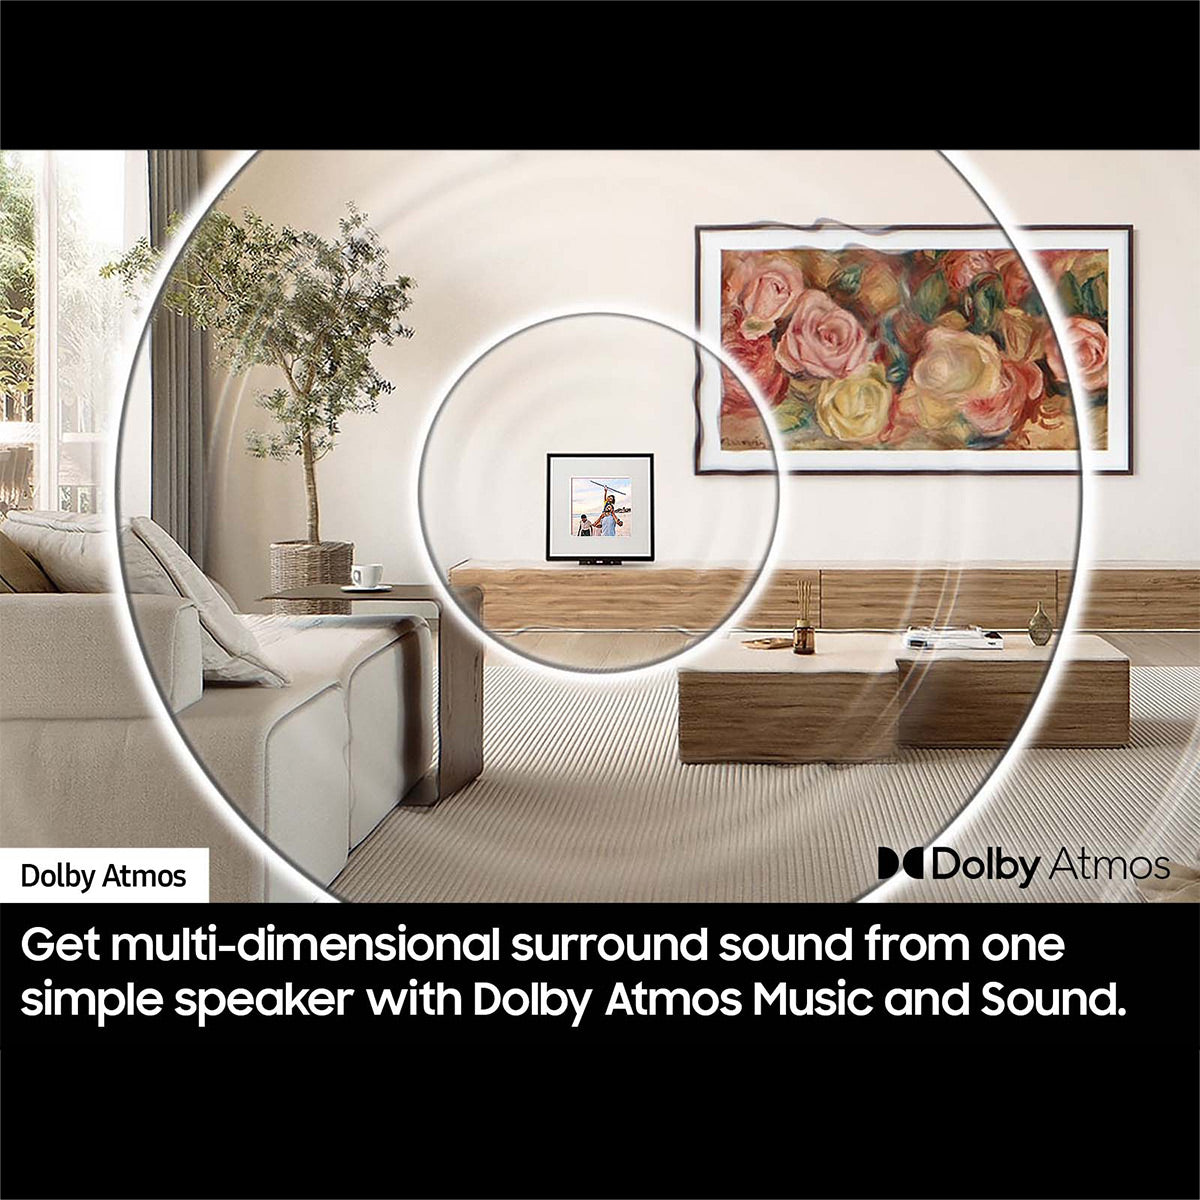 Samsung HW-LS60D Music Frame Bluetooth Speaker with Wall Mount